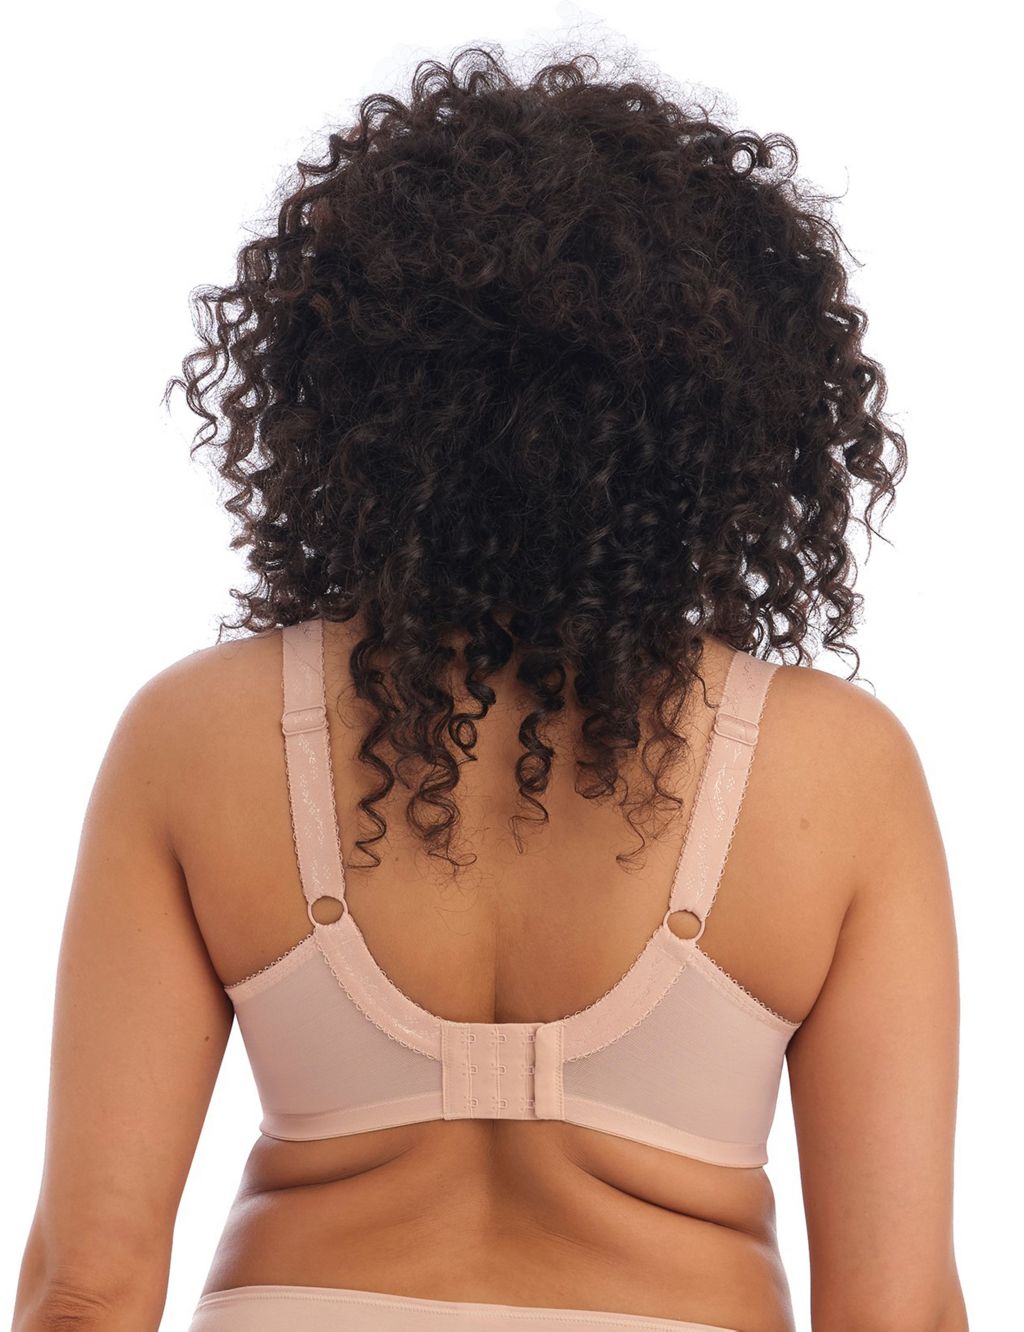 Morgan Lace Wired Side Support Bra DD-K image 4